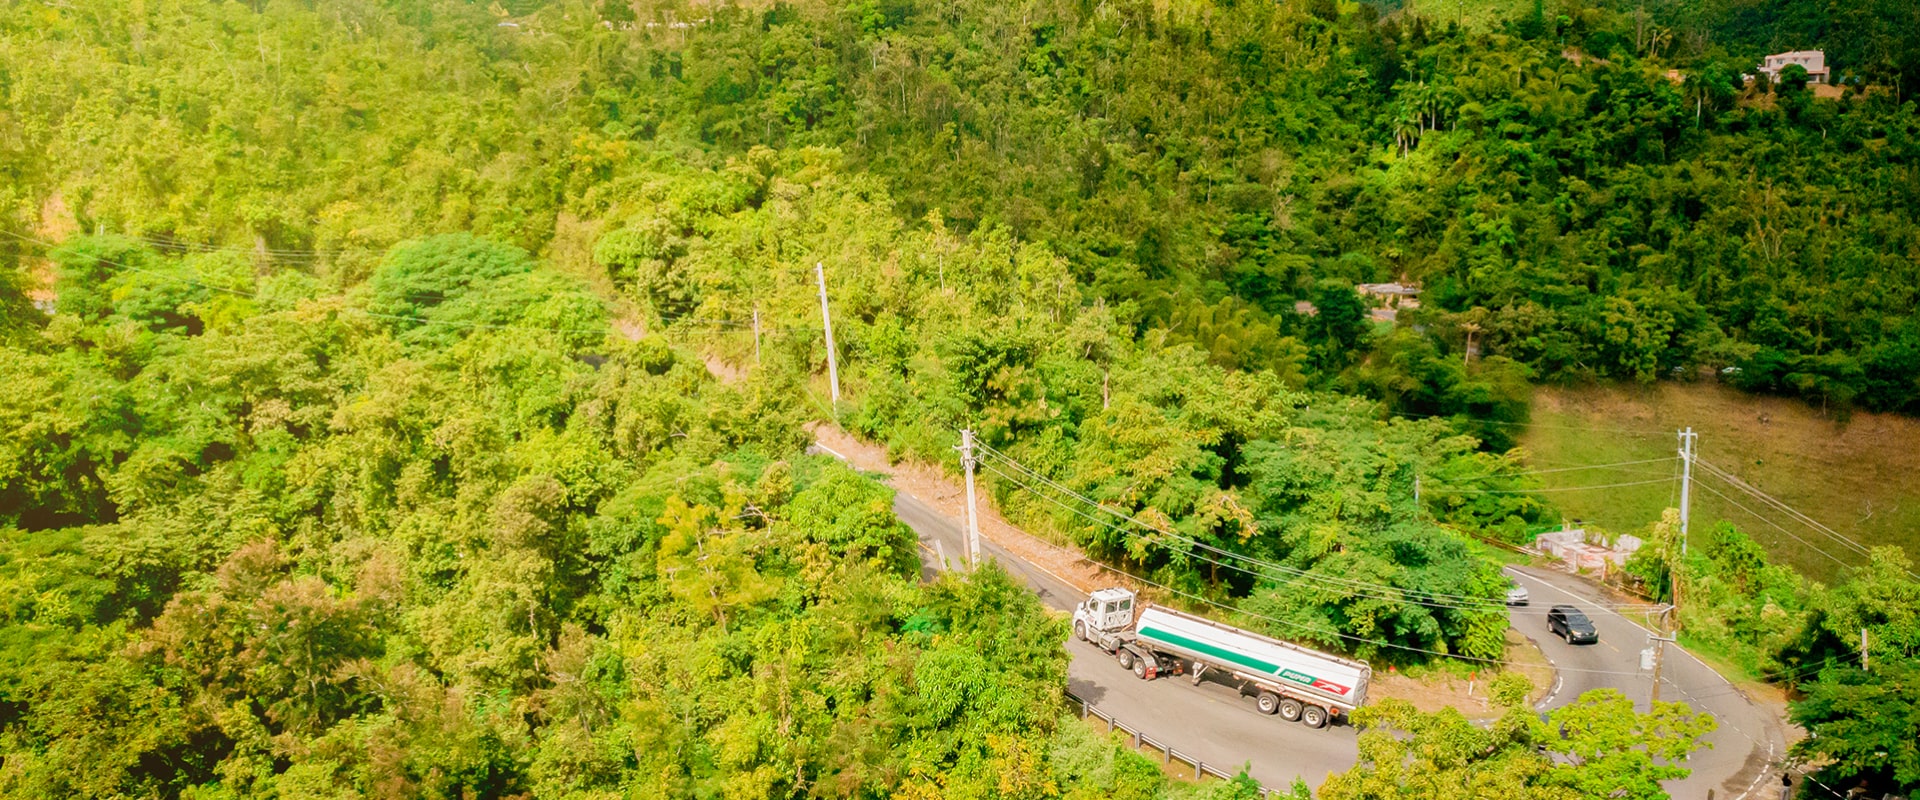 RS38114_Truck-in-Forest_20191210-Puma_Puerto_Rico_Tuesday3826_cf 1-min